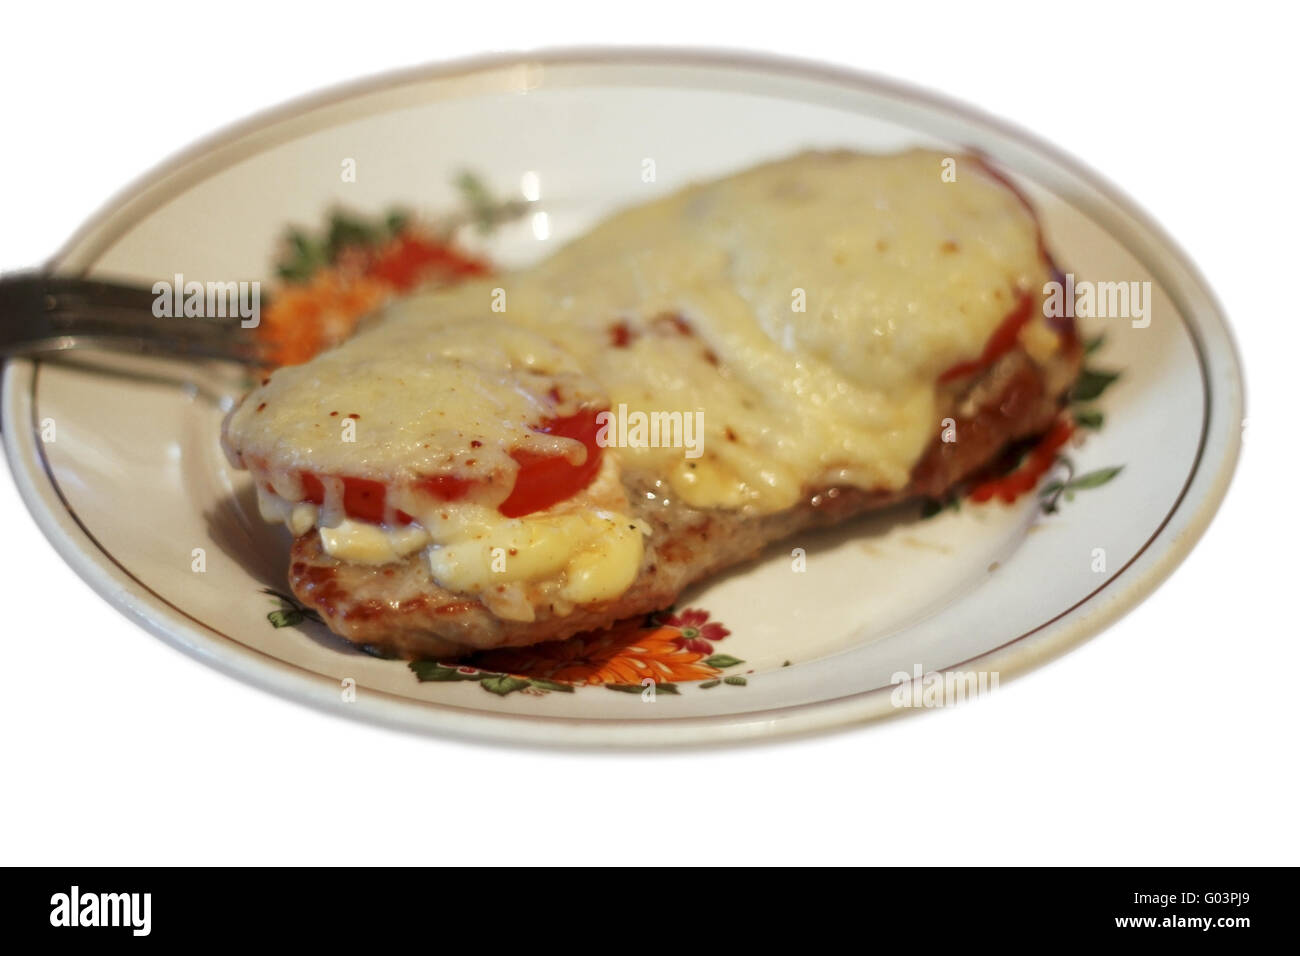 Fried meat a la french under cheese Stock Photo